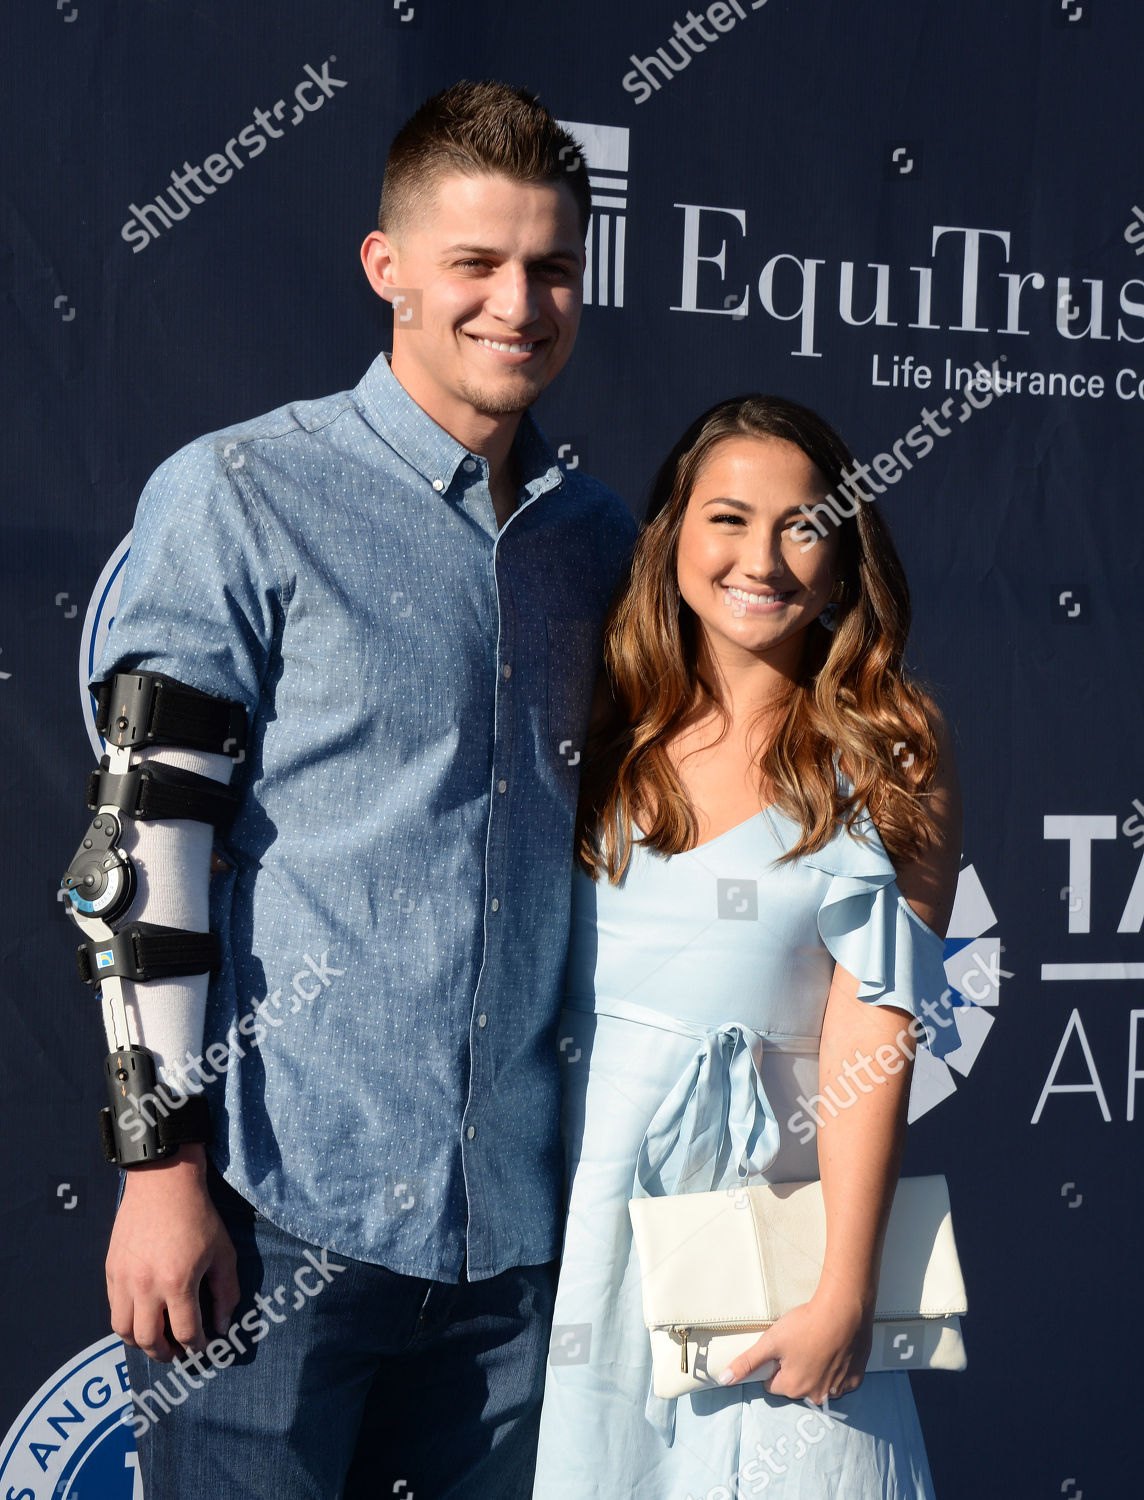 Corey Seager's Wife: Who Is Madisyn Van Ham?